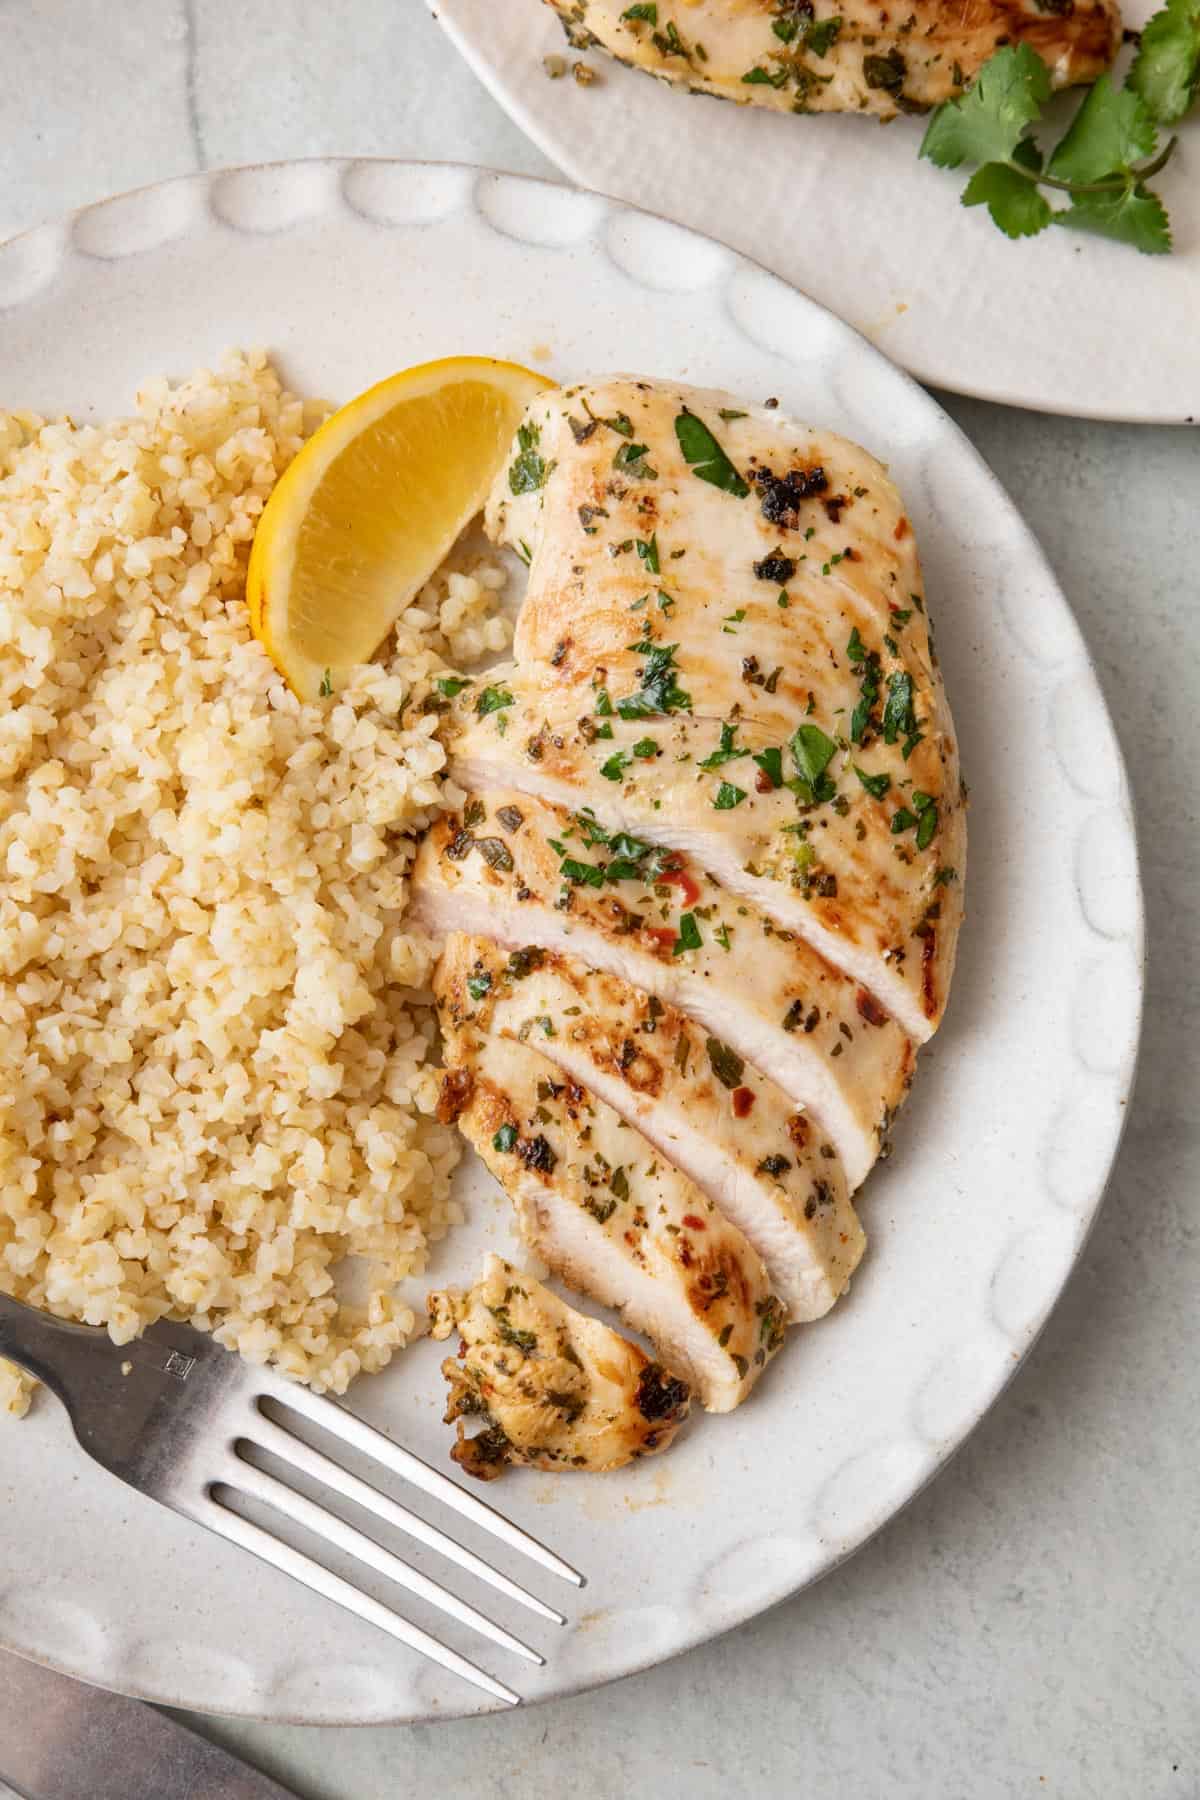 Cilantro chicken on a plate cut into slices halfway through chicken breast with a side of bulgur on a white plate, garnished with a lemon wedge and a fork on plate.